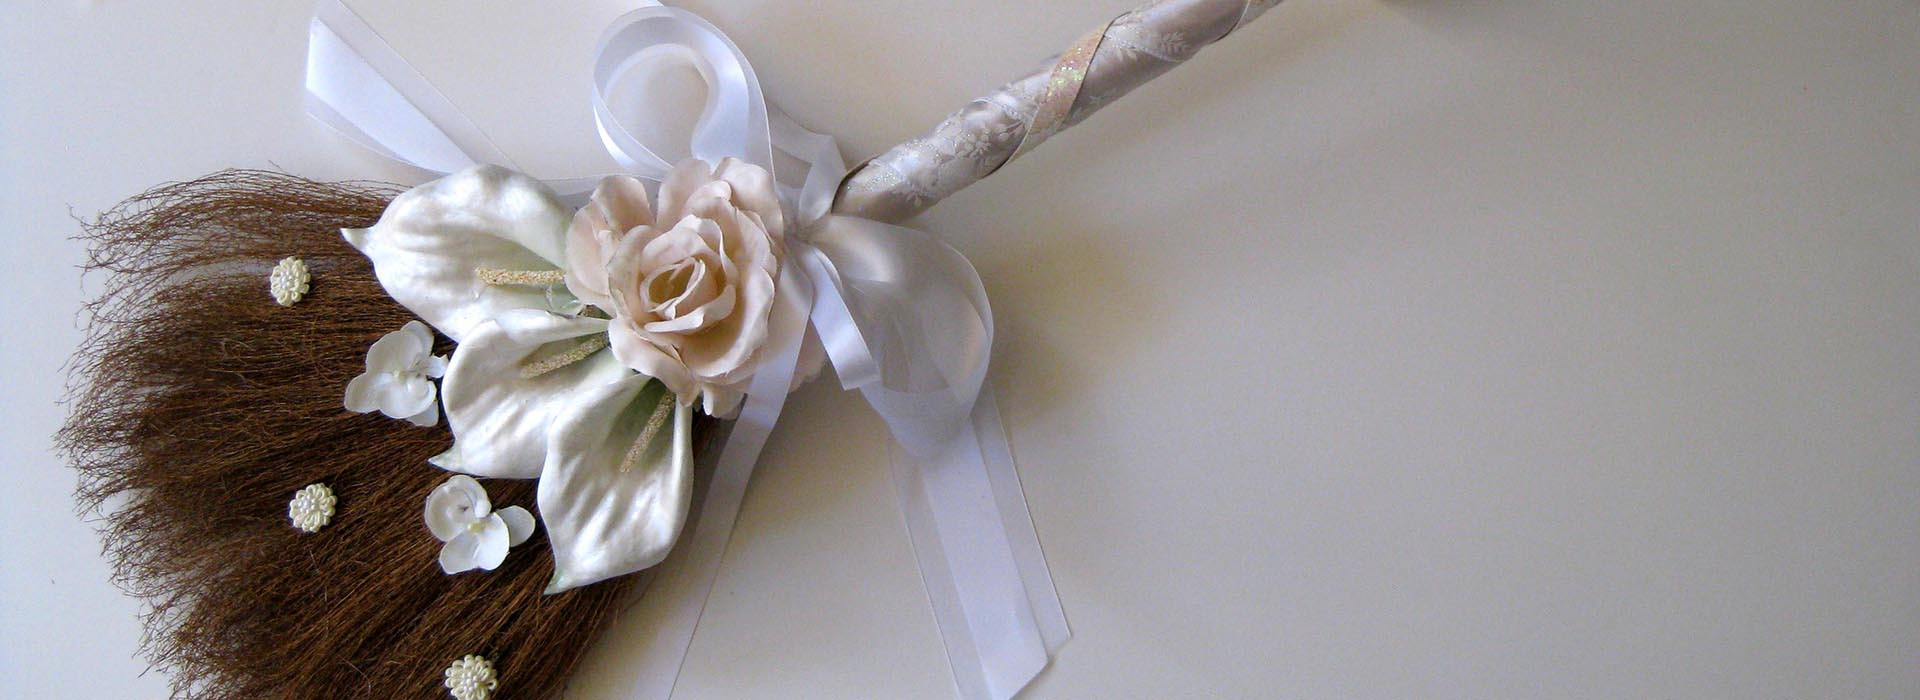 Wedding Brooms » The perfect wedding accessory for "Jump the Broom Ceremony". Handmade by Alicia Jones